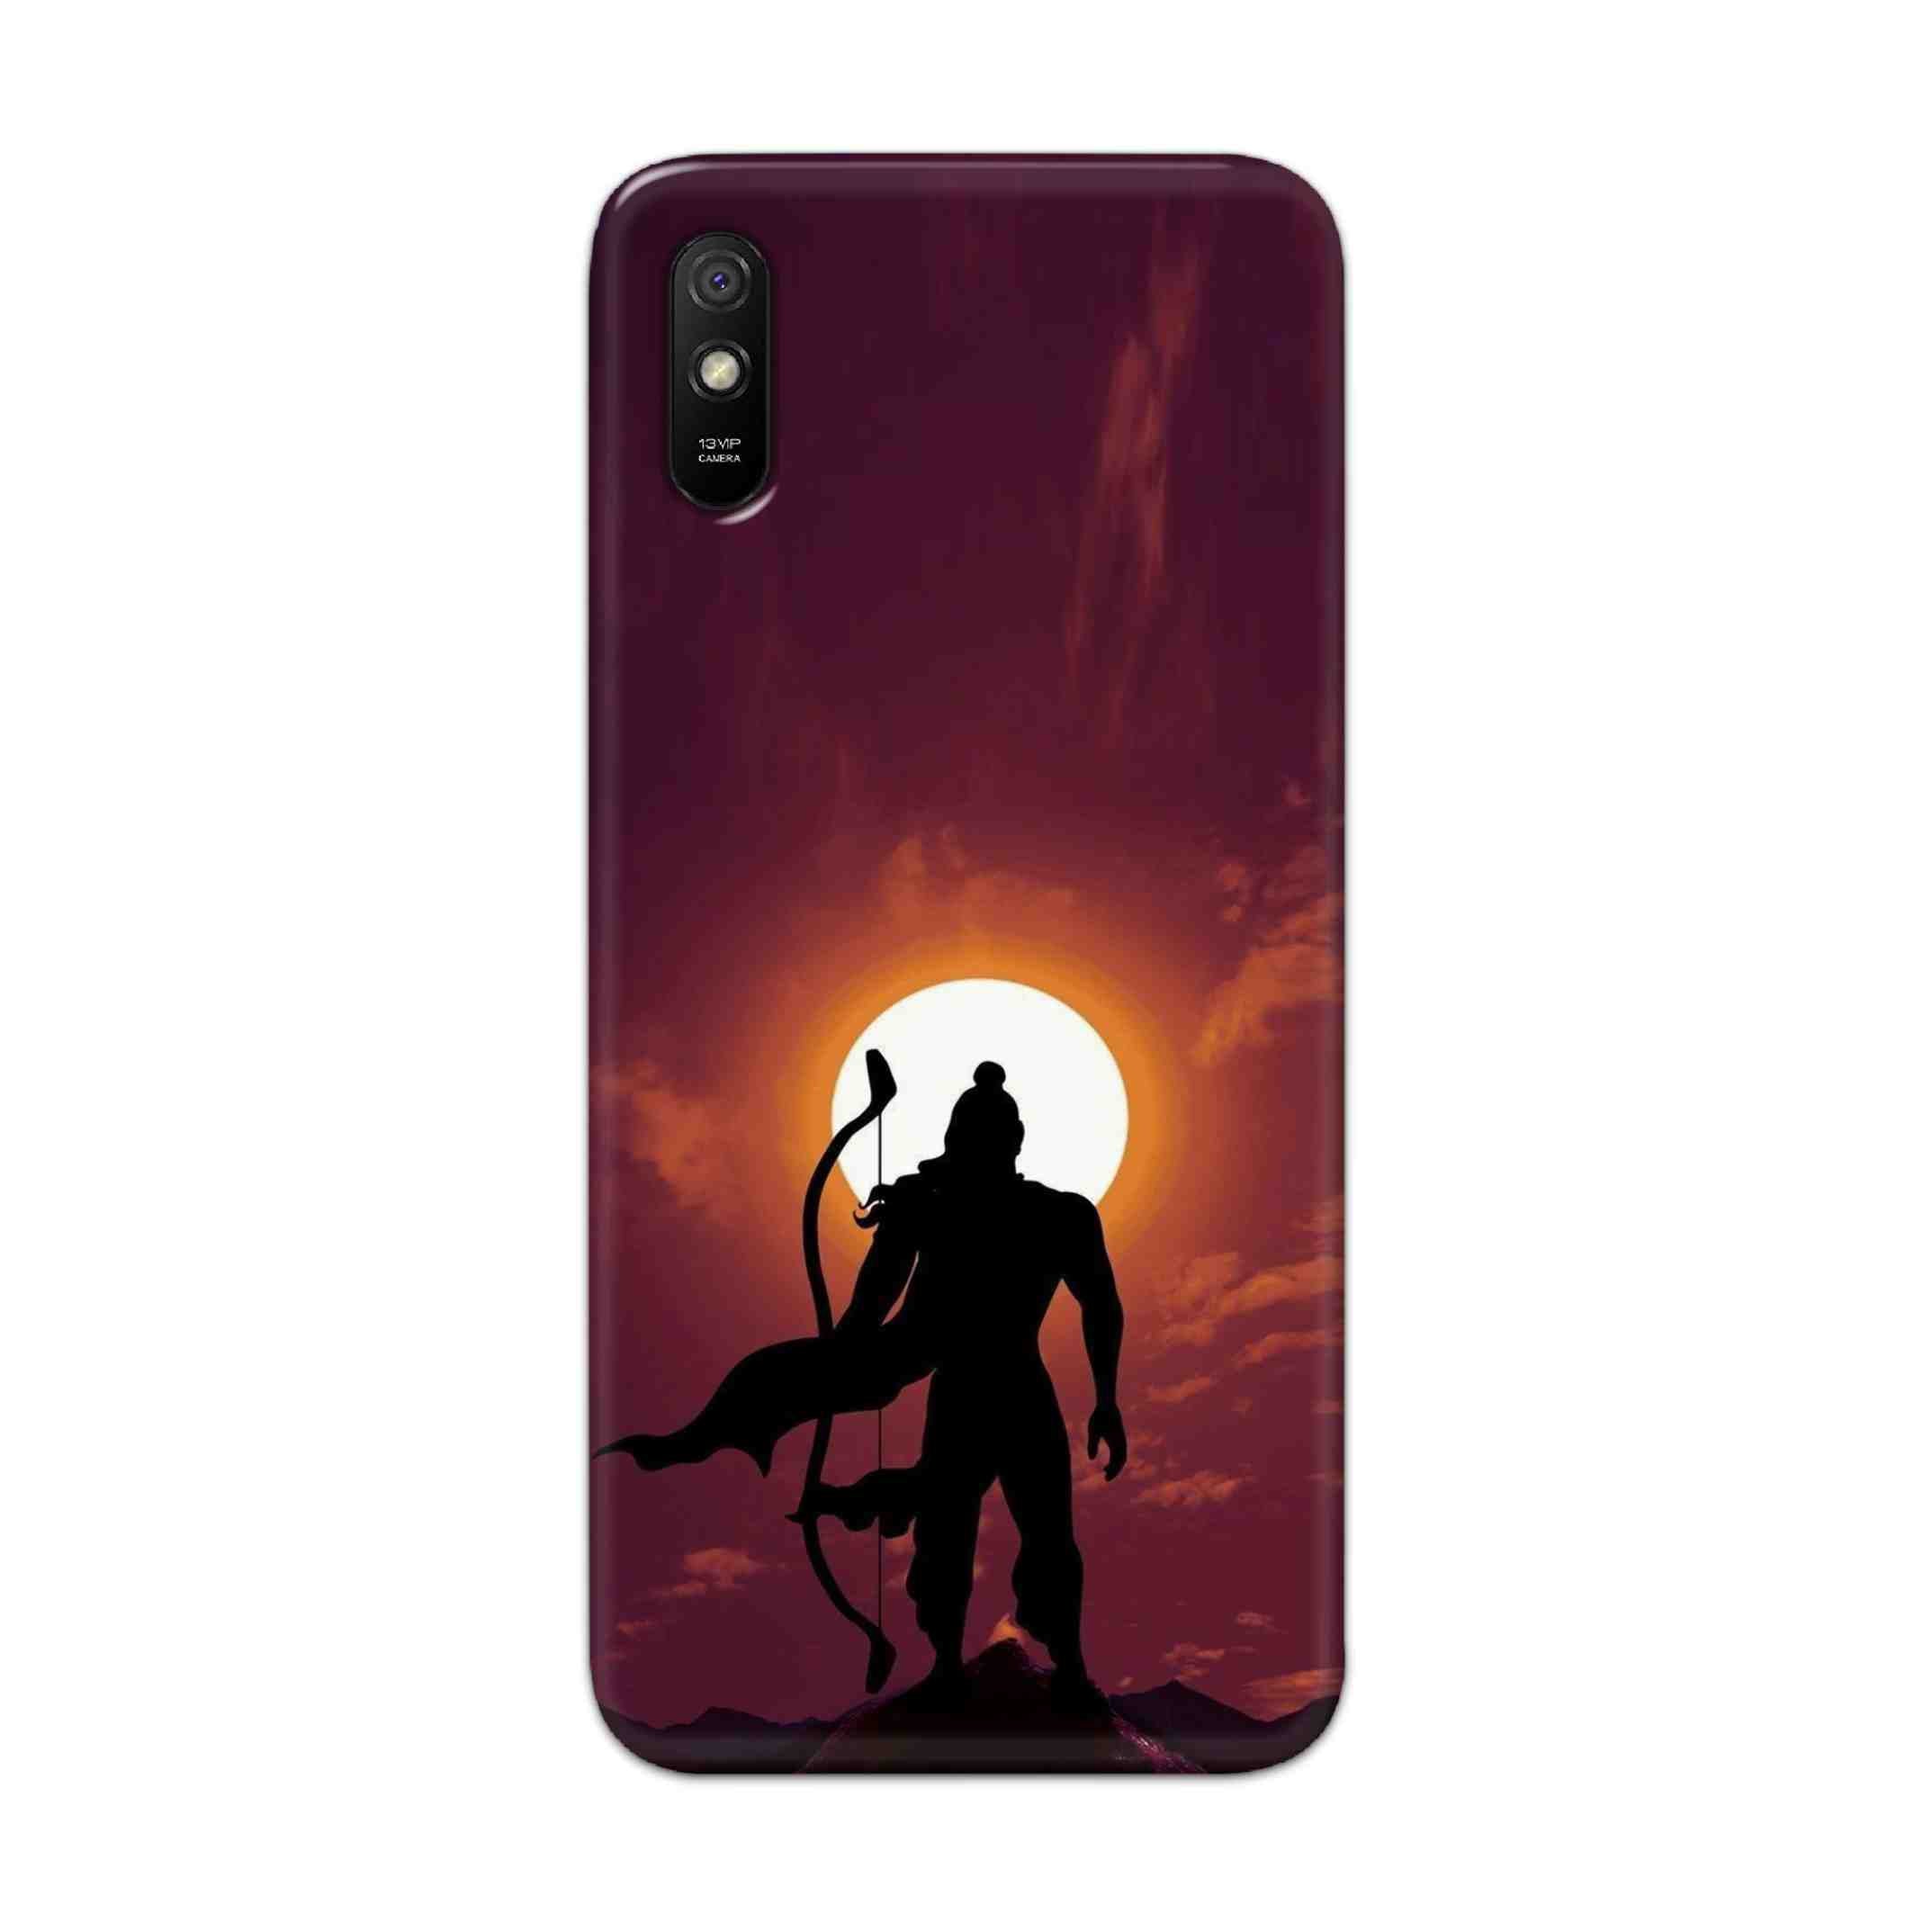 Buy Ram Hard Back Mobile Phone Case Cover For Redmi 9A Online